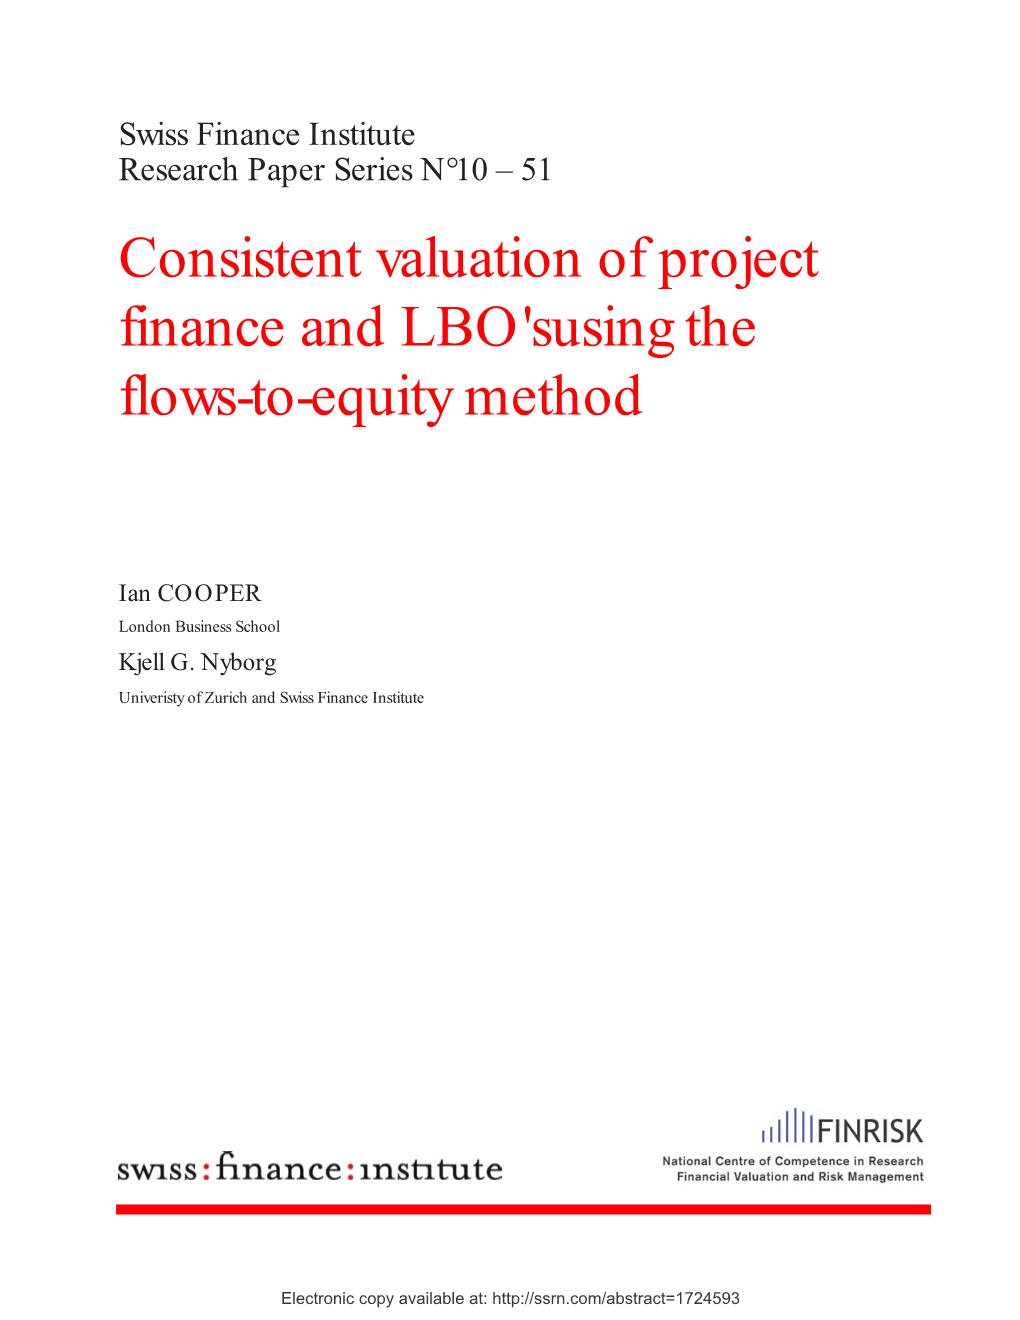 Consistent Valuation of Project Finance and LBO'susing the Flows-To-Equity Method